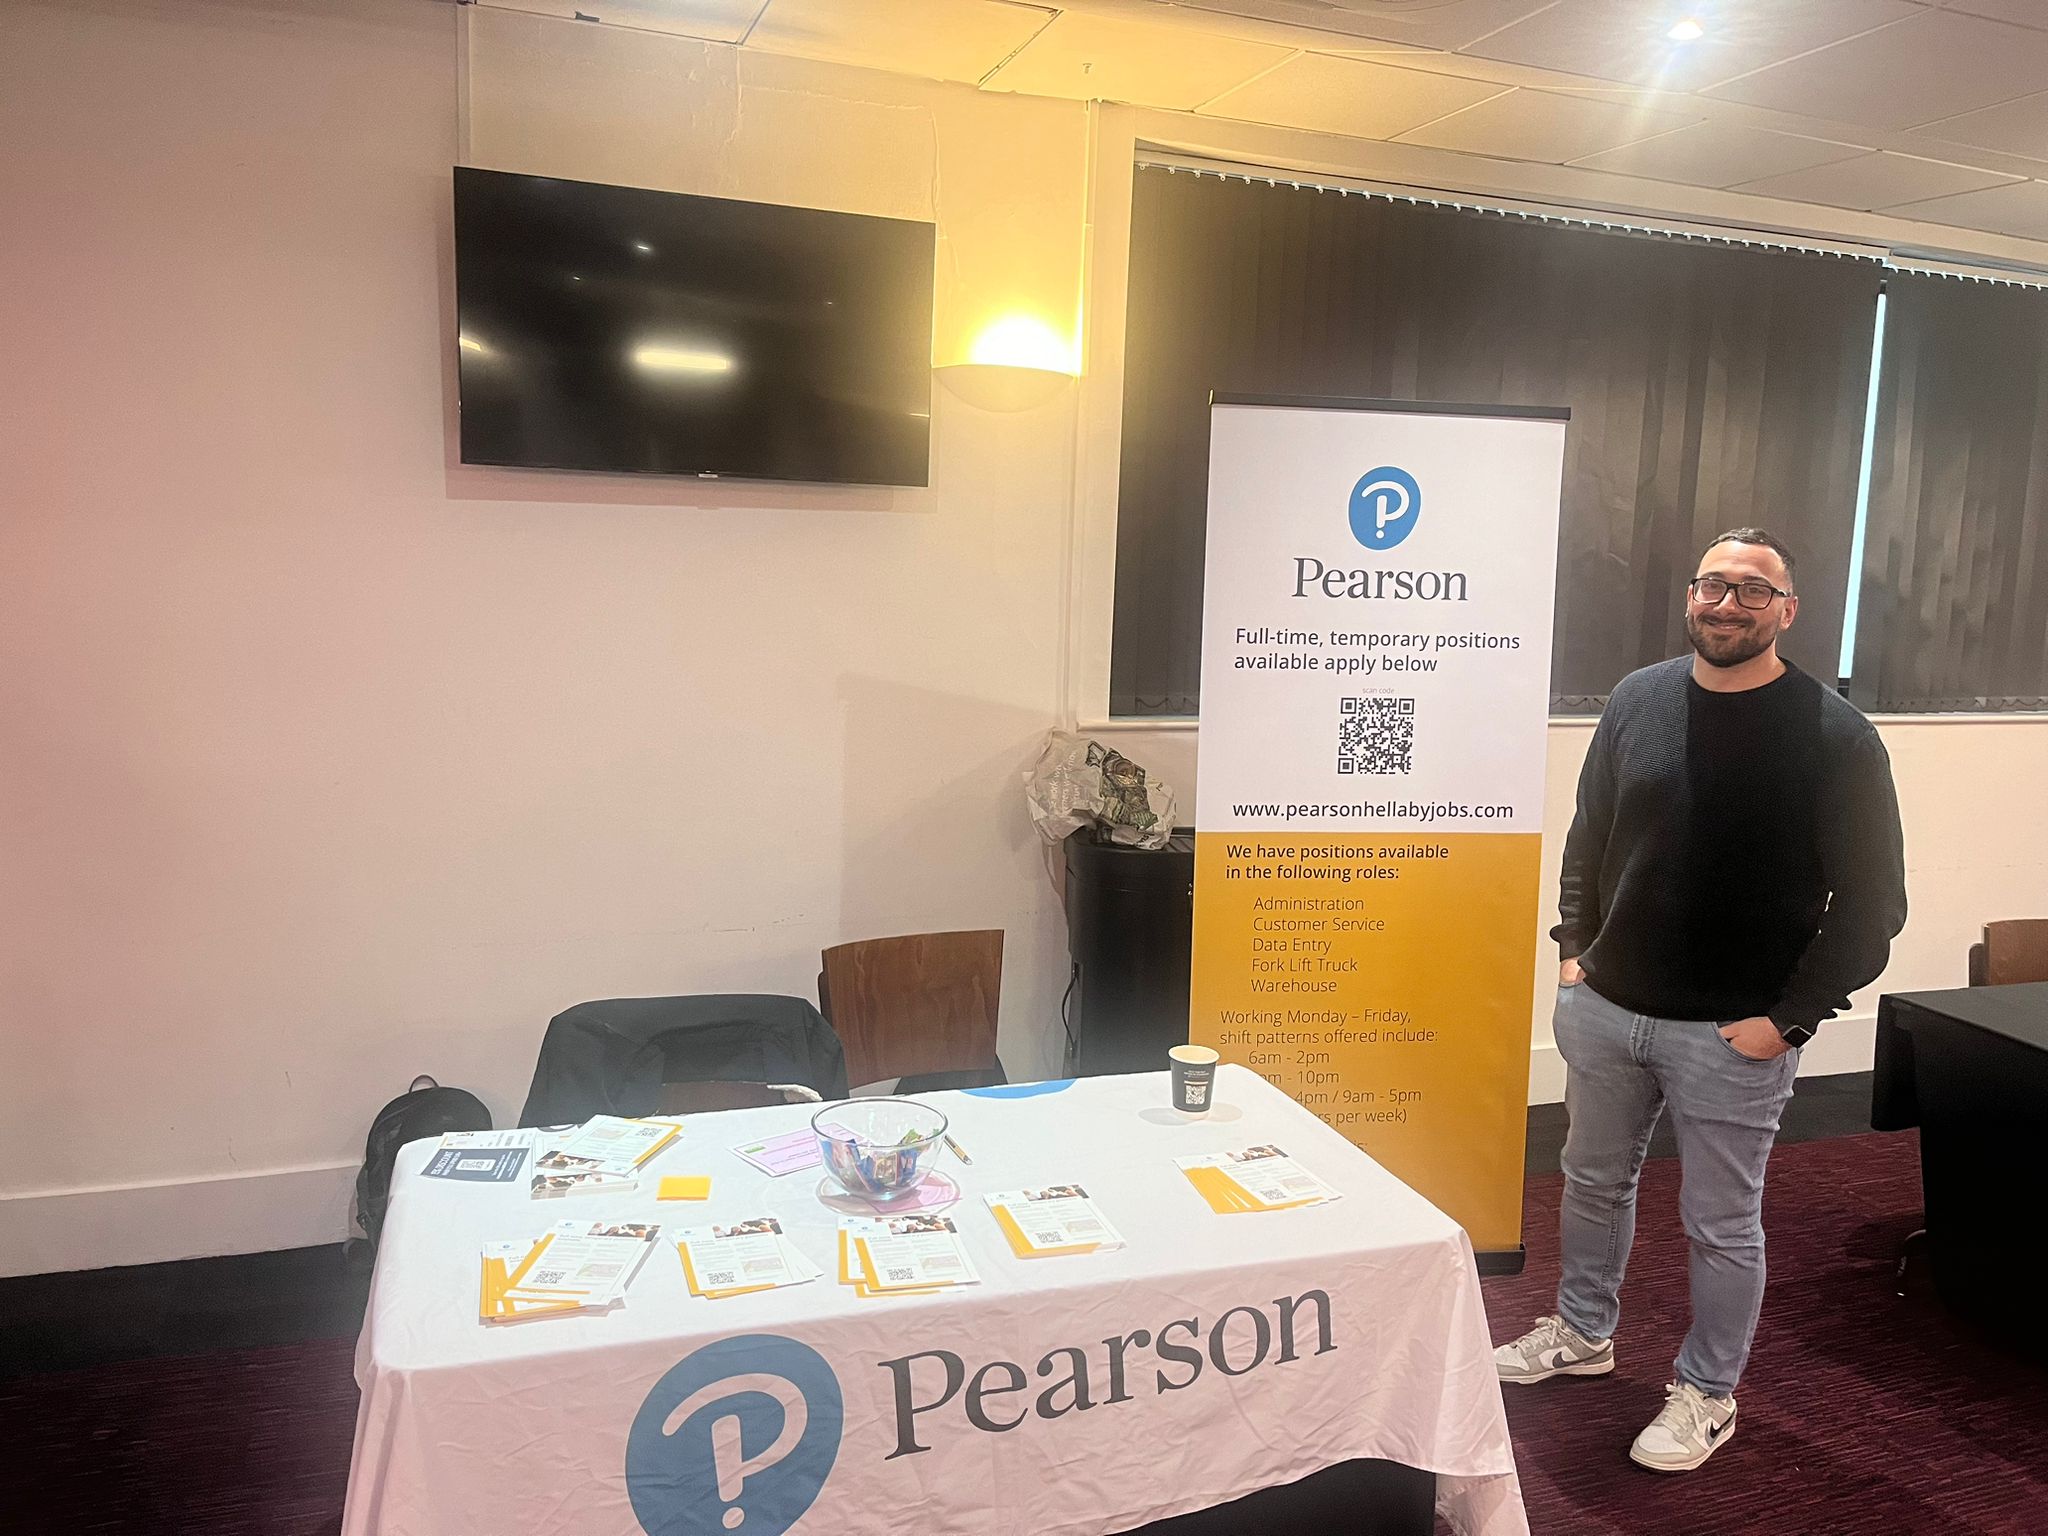 Pearson at our event in Sheffield